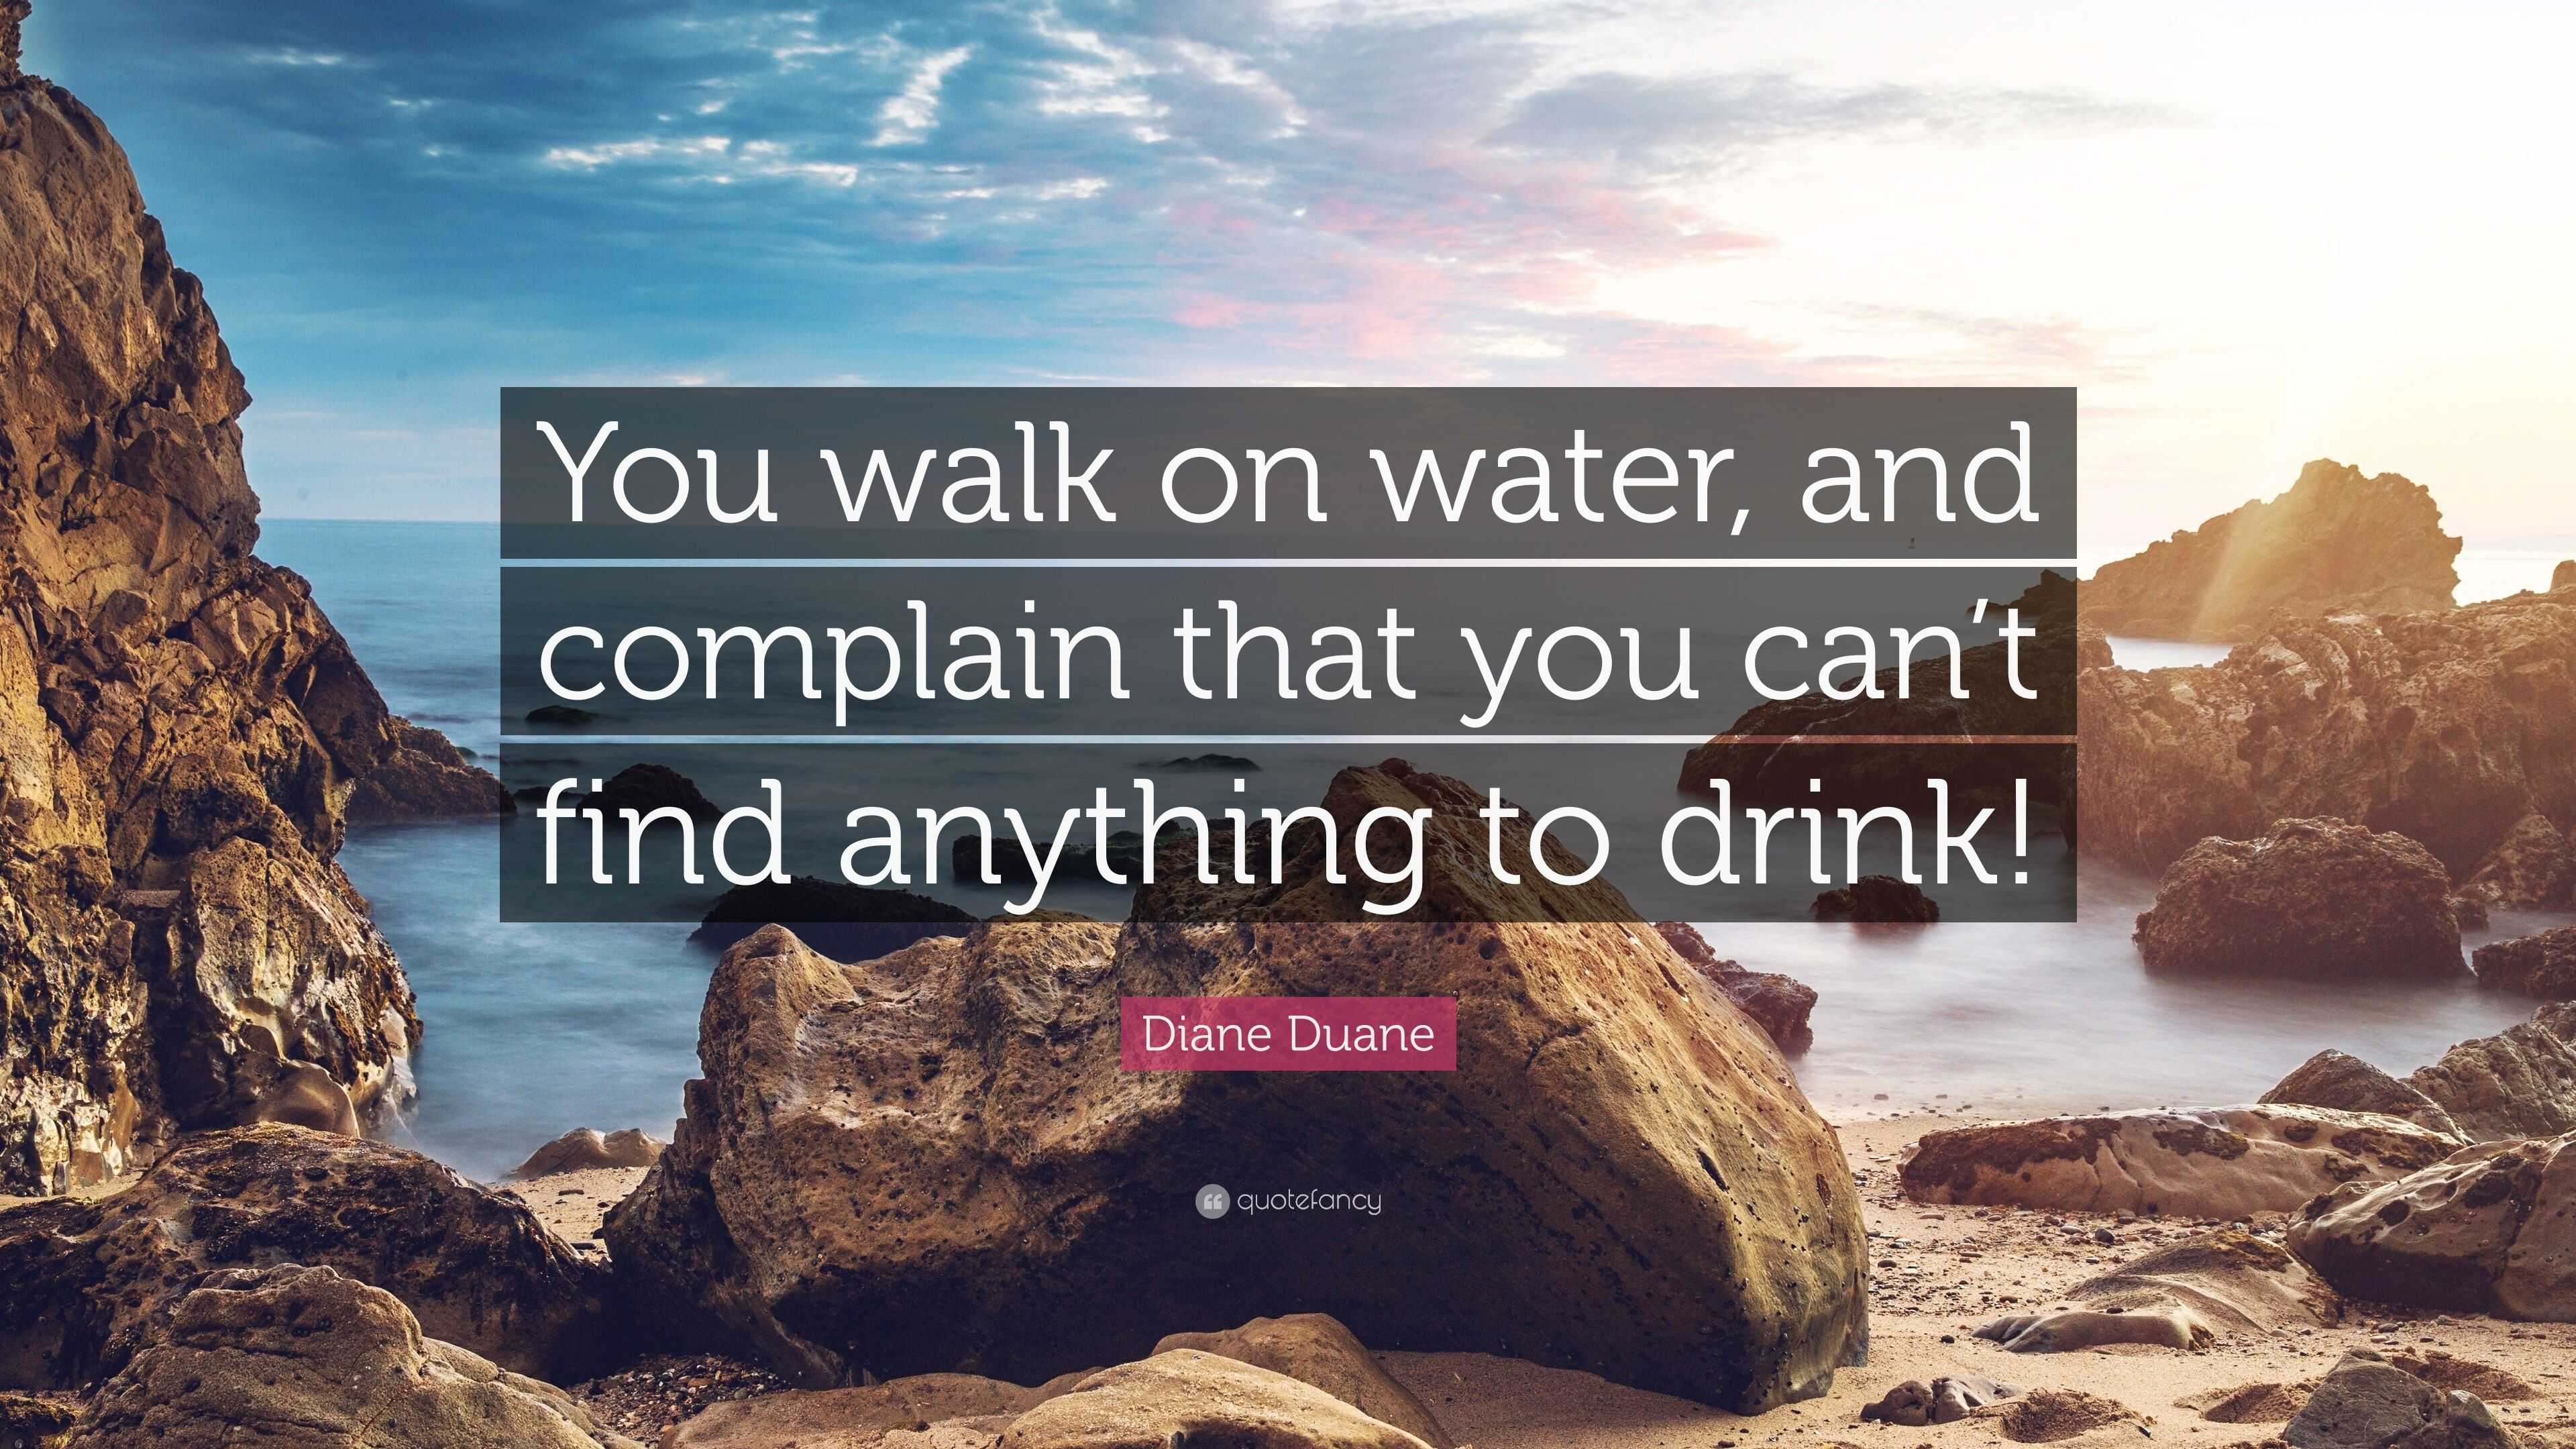 Diane Duane Quote: “You walk on water, and complain that you can’t find ...